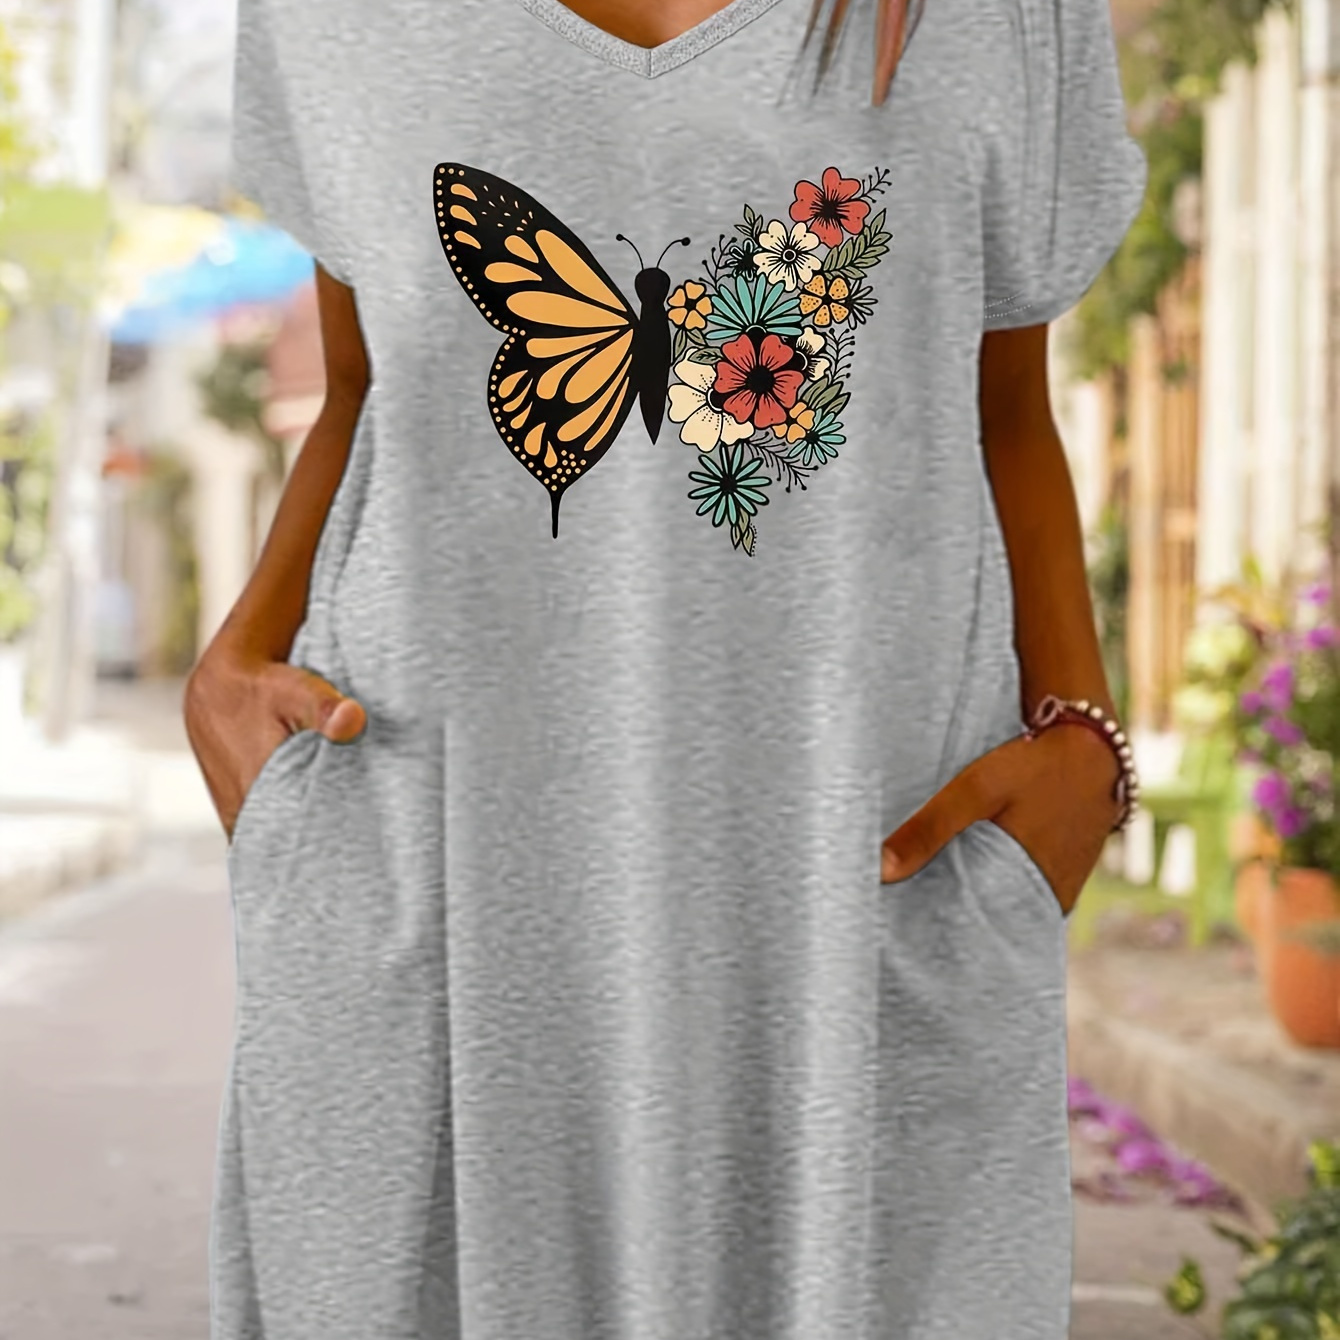 

Floral & Butterfly Print Dual Pockets Tee Dress, Casual Loose Dress For Spring & Summer, Women's Clothing